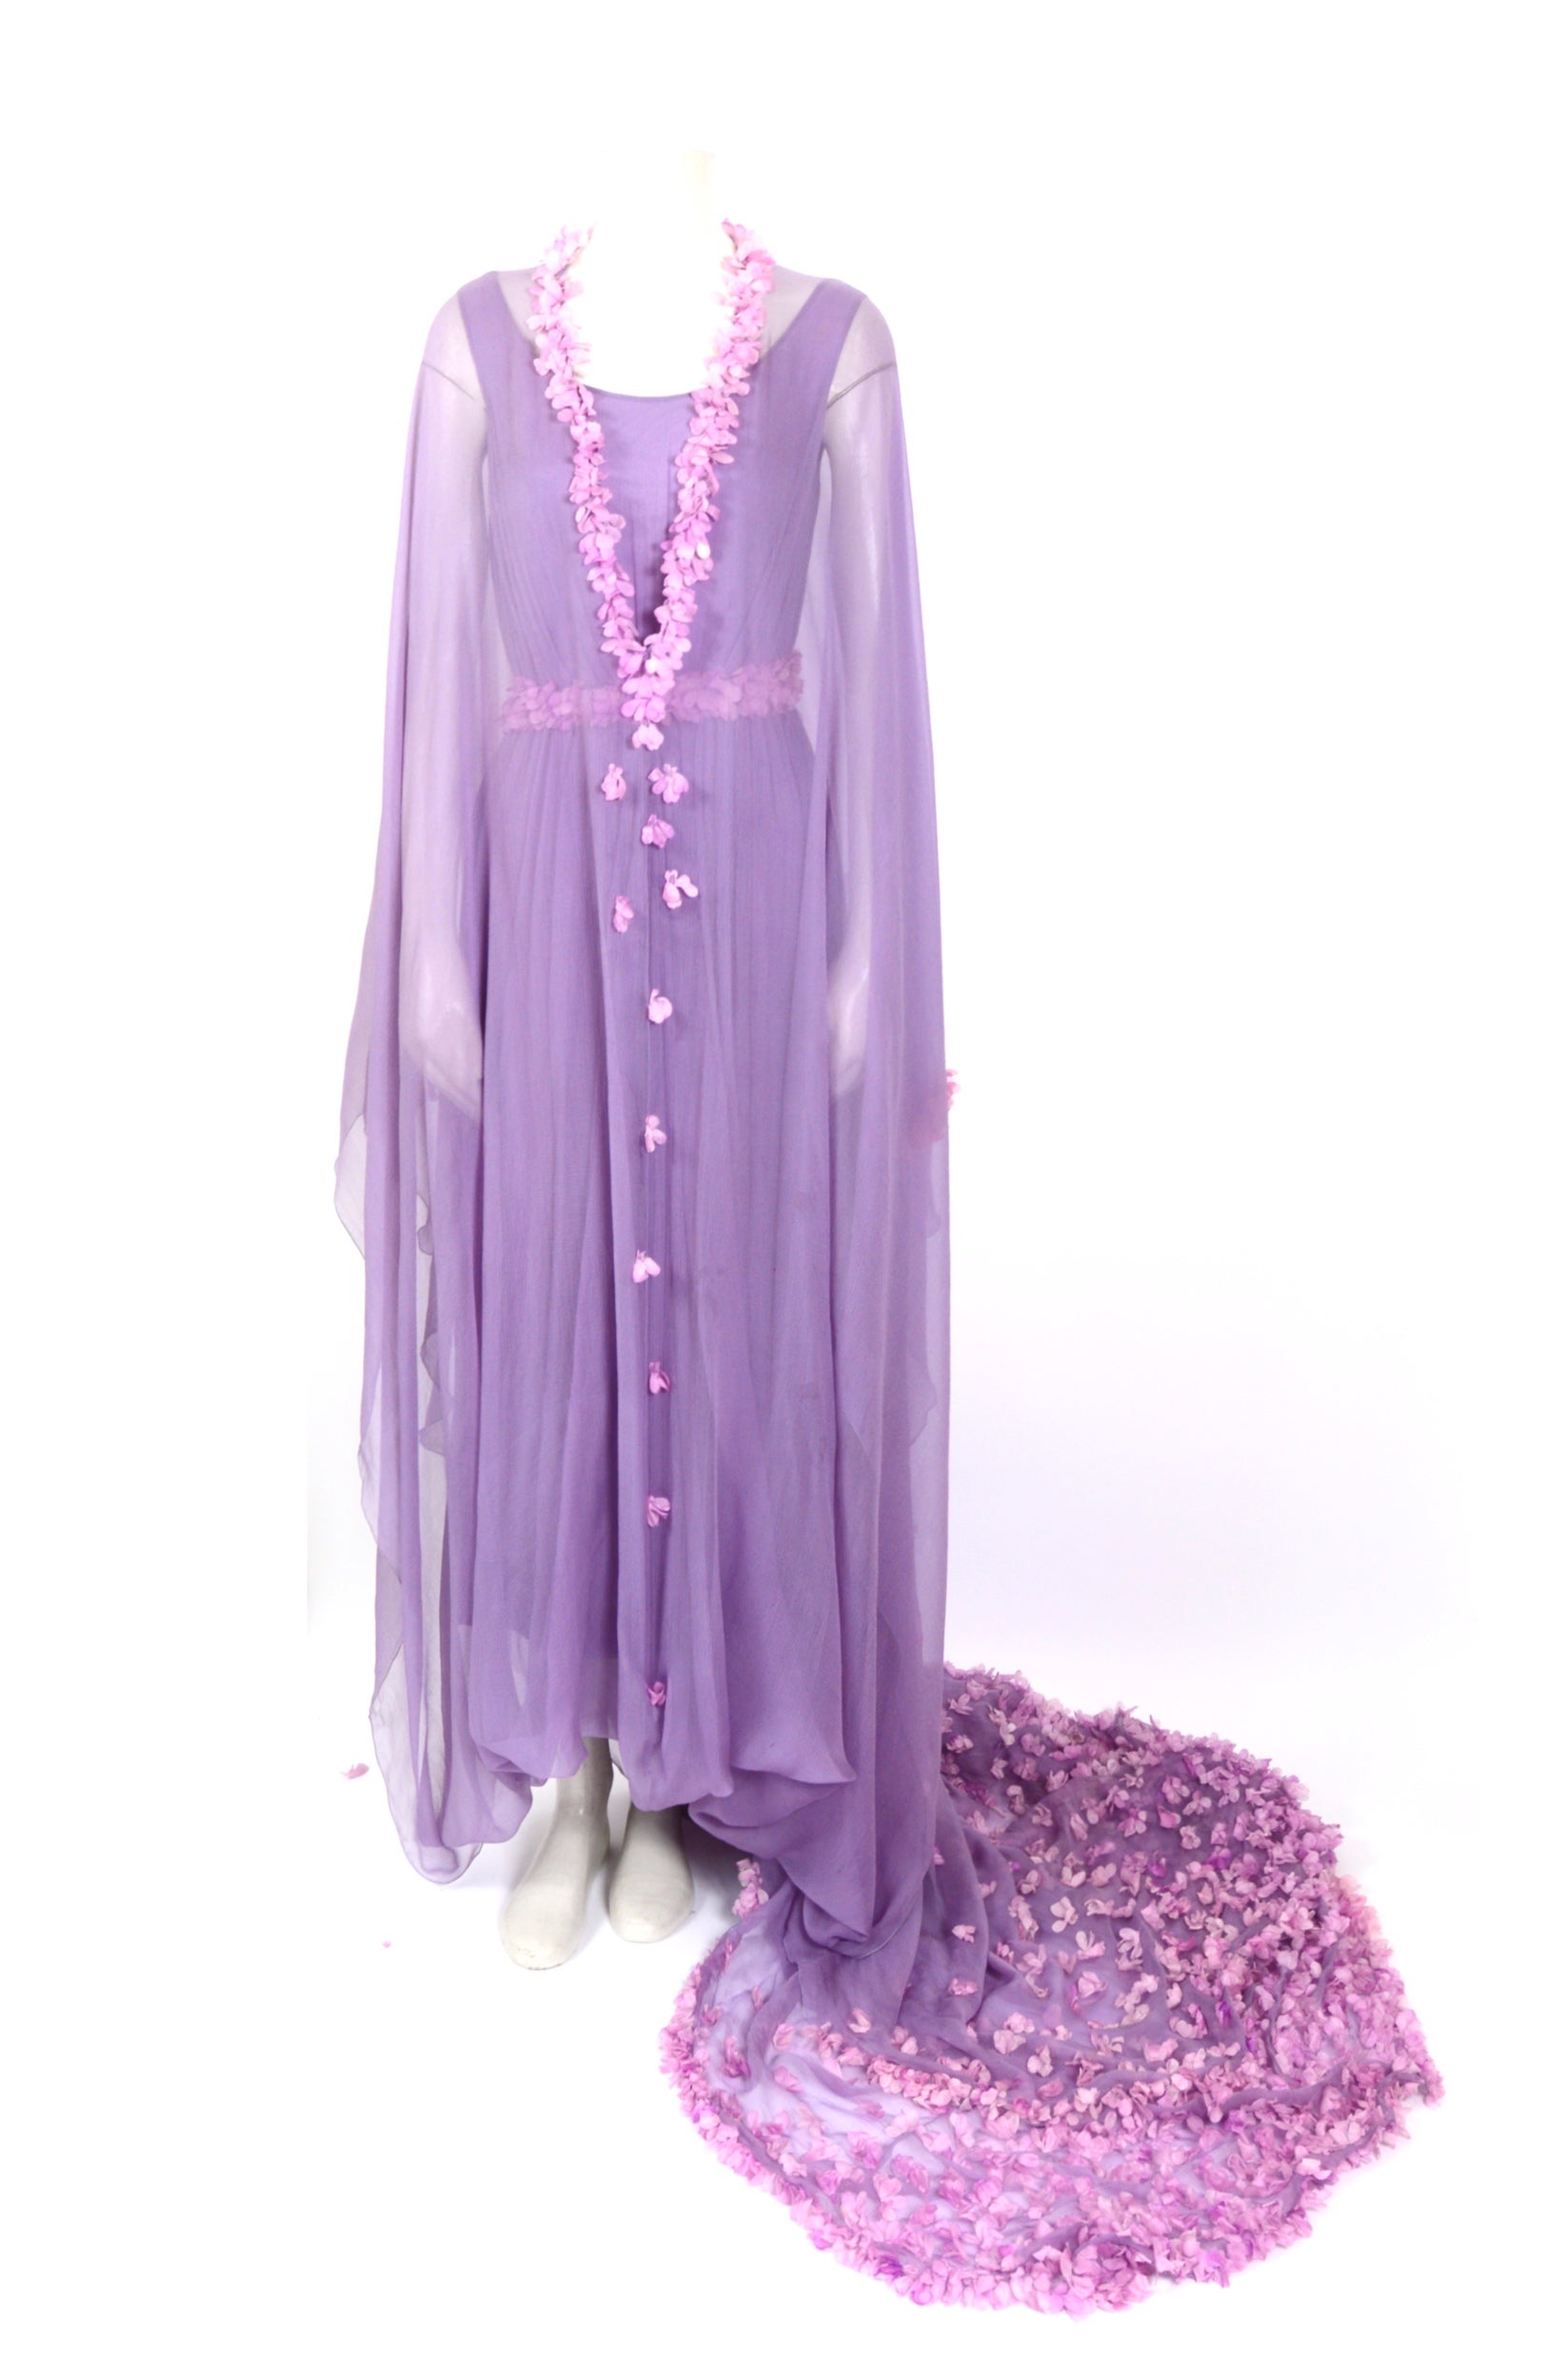 Valentino 1960s costume made silk lilac kaftan dress flower embellished train   In Excellent Condition For Sale In Antwerpen, Vlaams Gewest